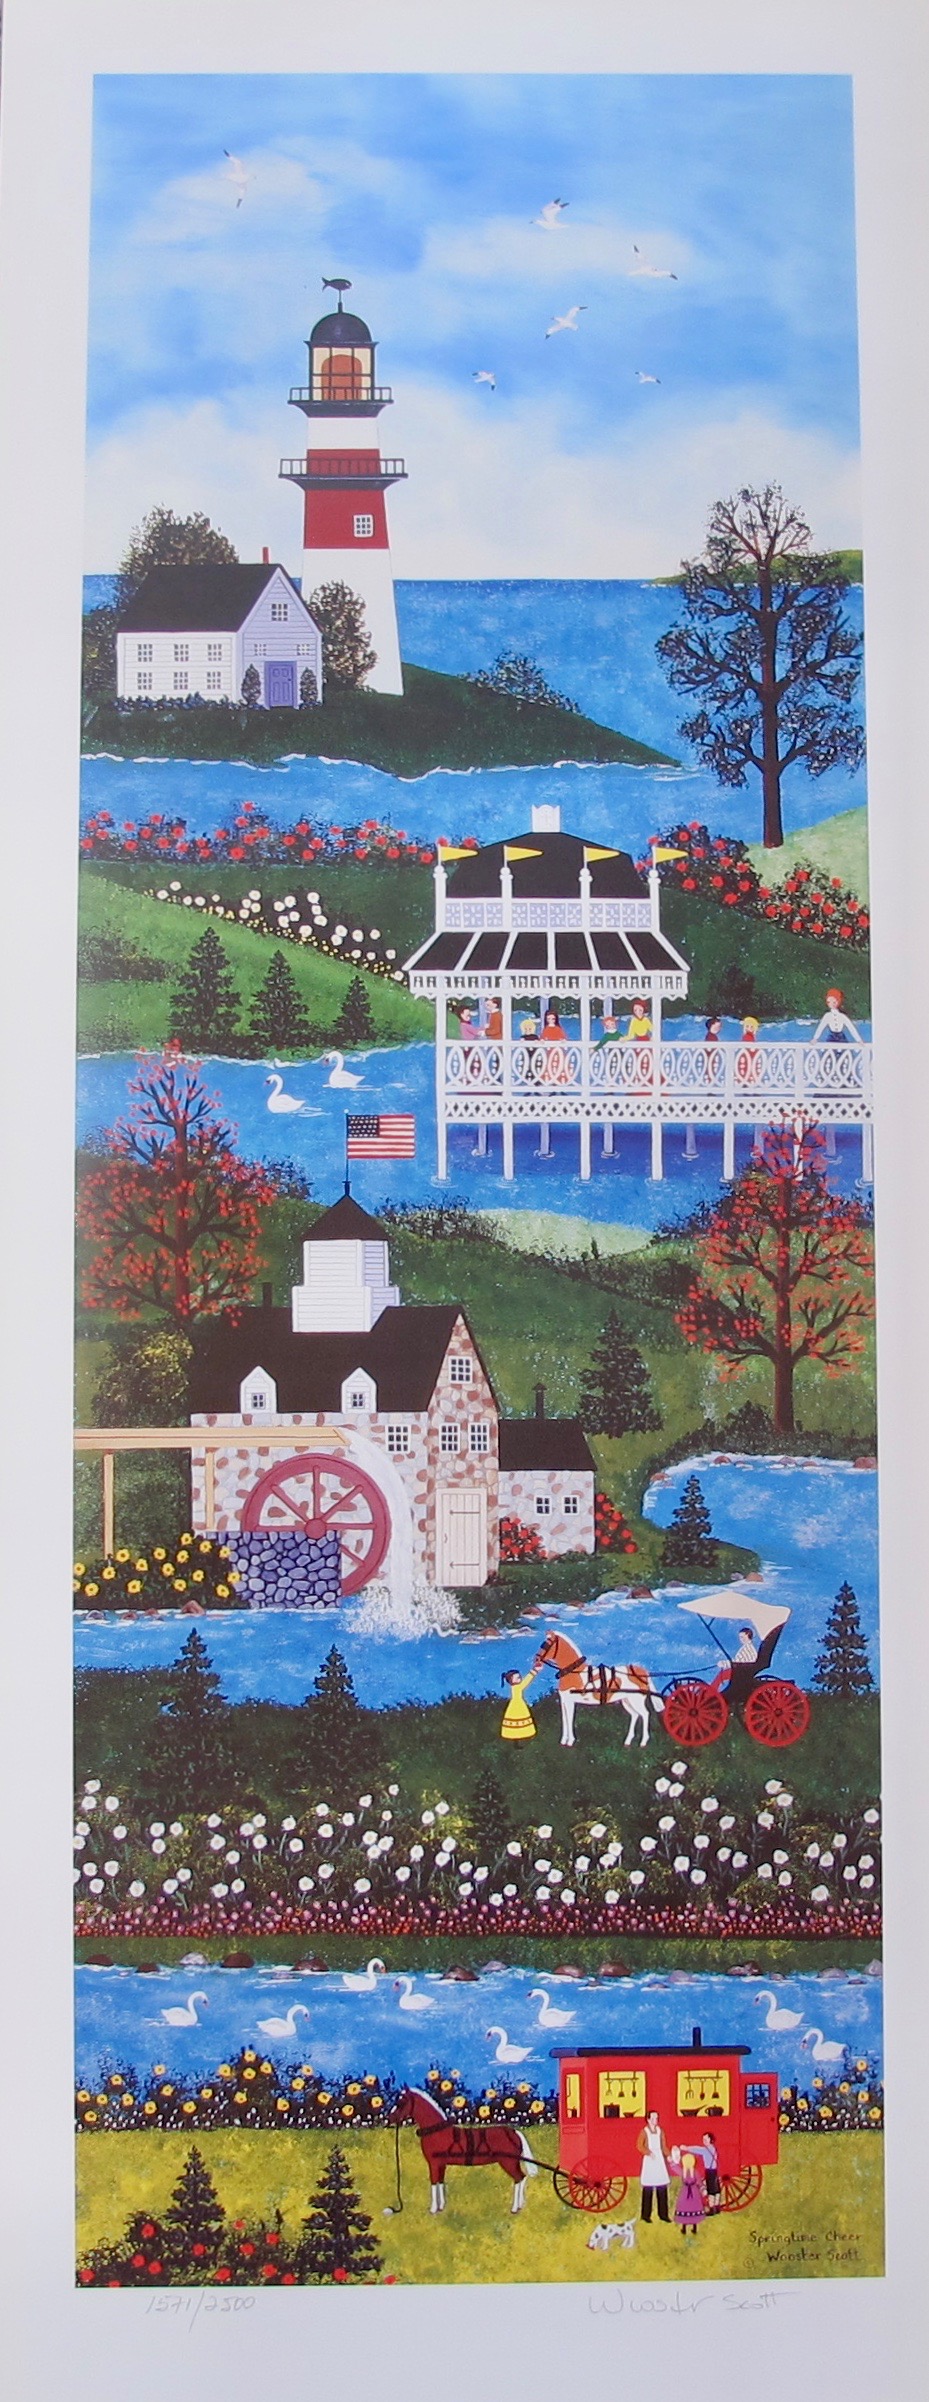 Jane Wooster Scott SPRINGTIME CHEER Hand Signed Limited Edition Lithograph